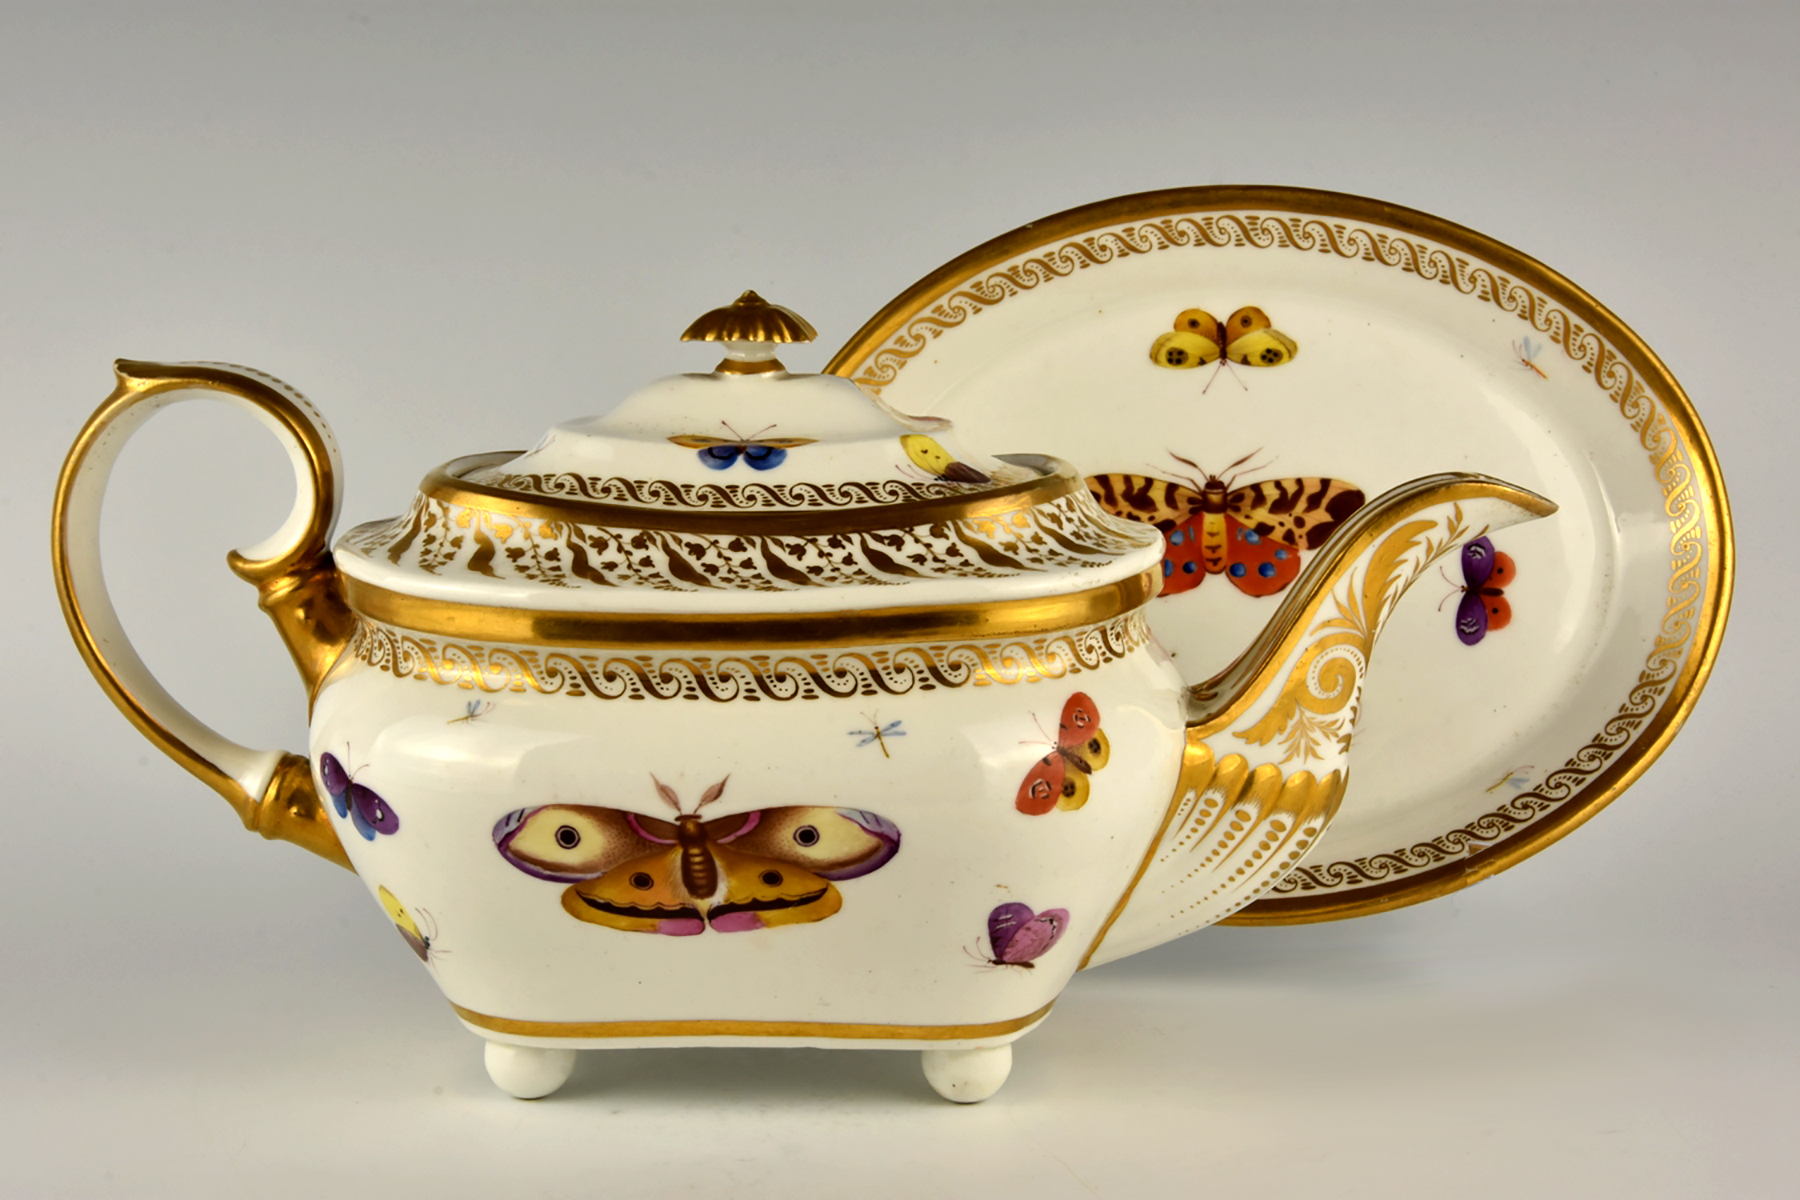 Derby Porcelain Society To Stage Major Exhibition at Antiques for Everyone